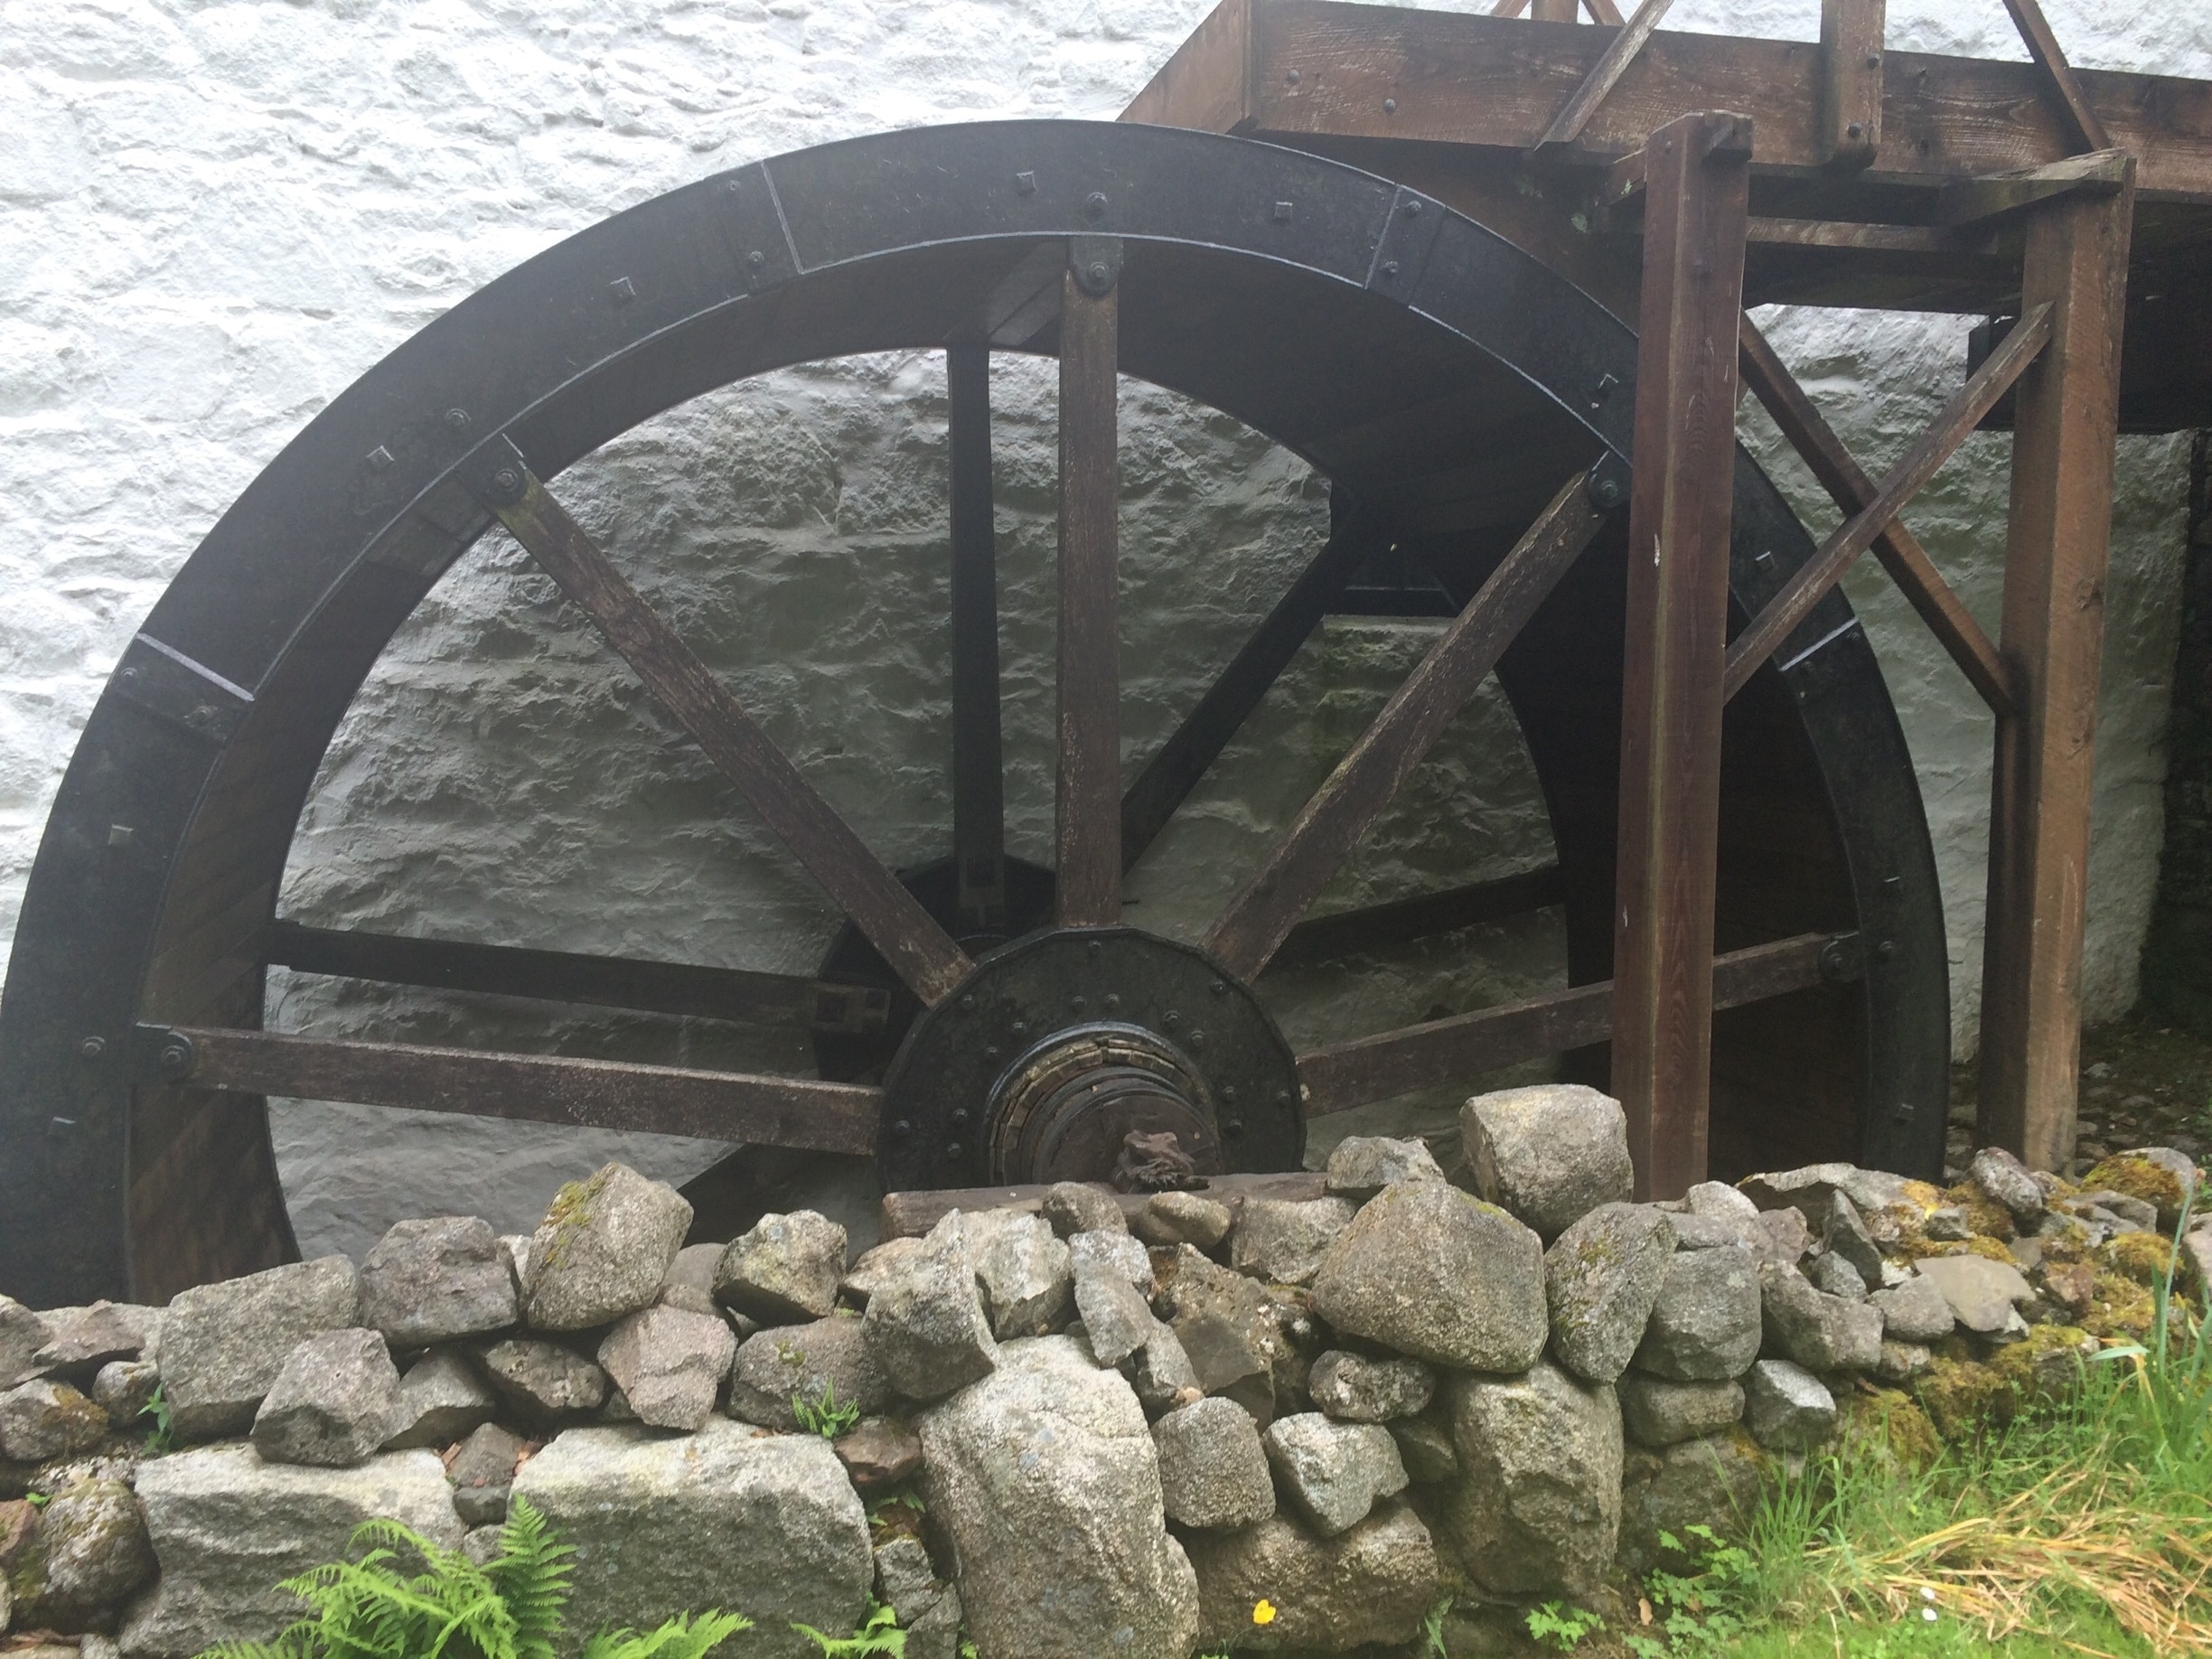 The water wheel at the corn mill